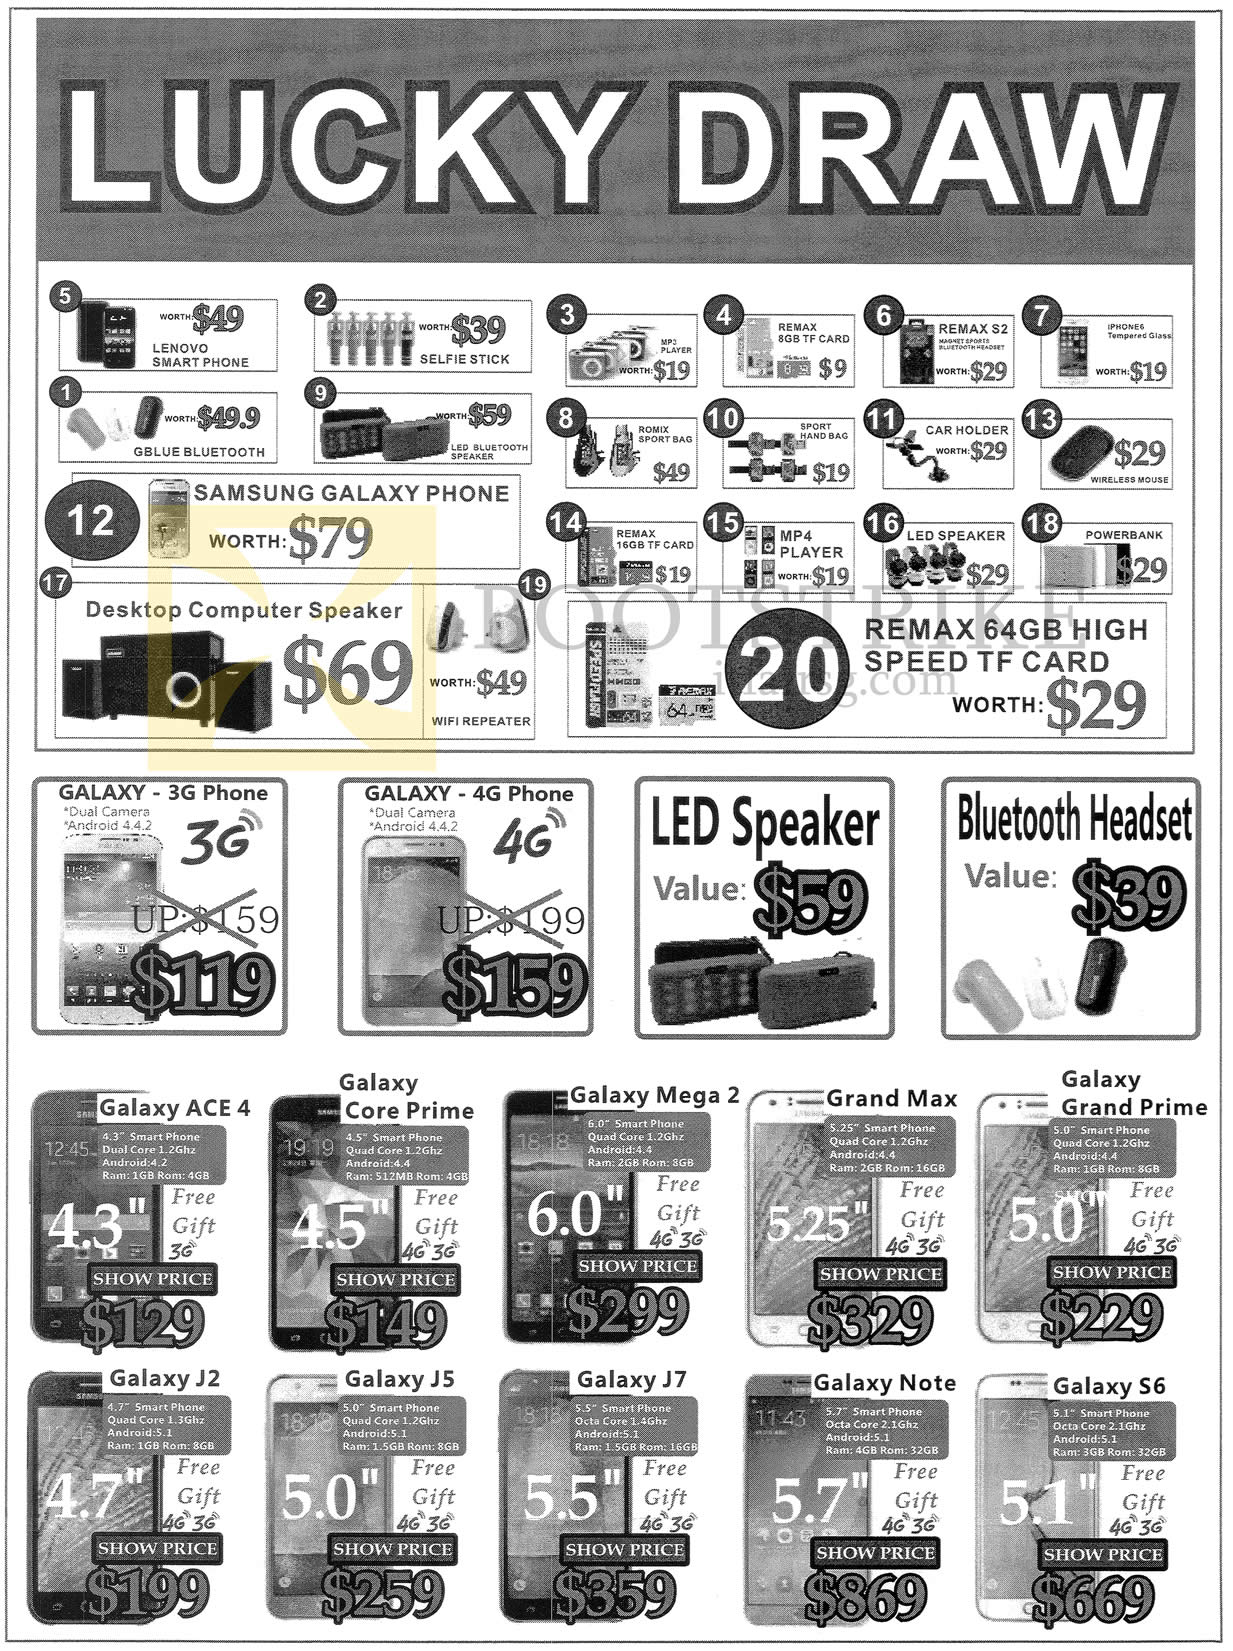 IT SHOW 2016 price list image brochure of J2 Lucky Draw Mobile Phones, Accessories, Galaxy 3G, 4G, Ace 4, Core Prme, Mega 2, Max, J2, J5, J7